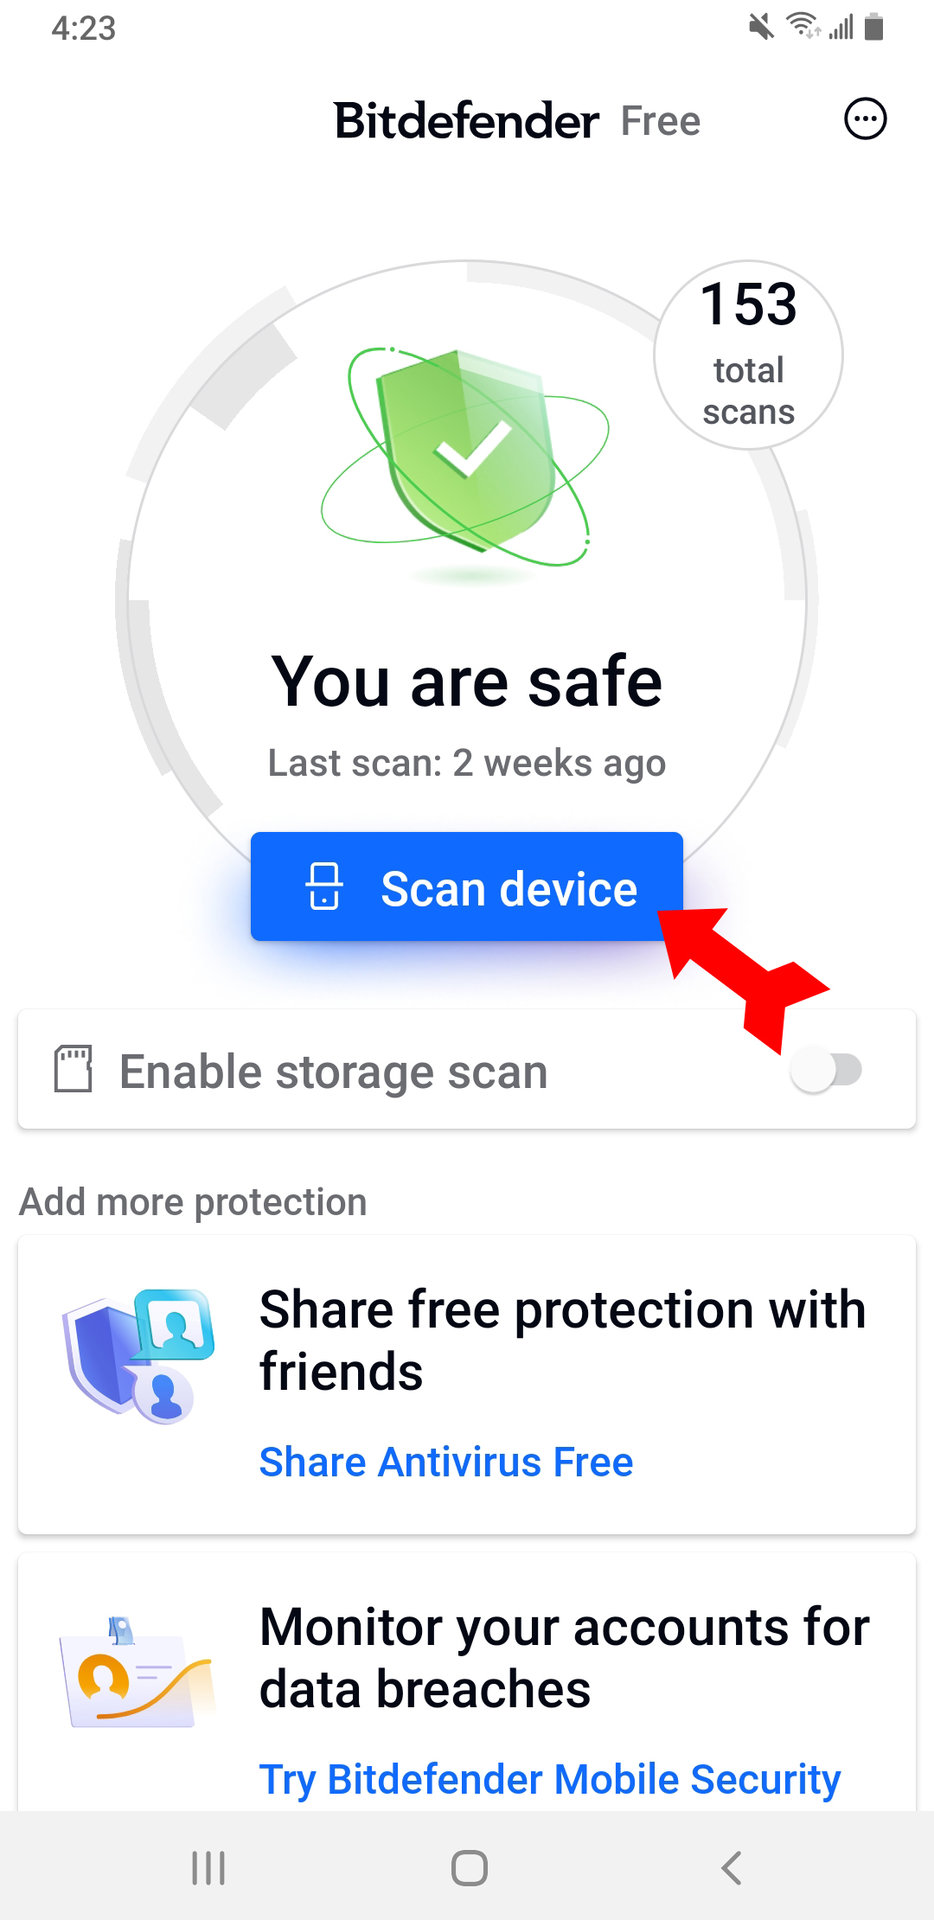 Install a reliable security app
Regularly scan your device for malware